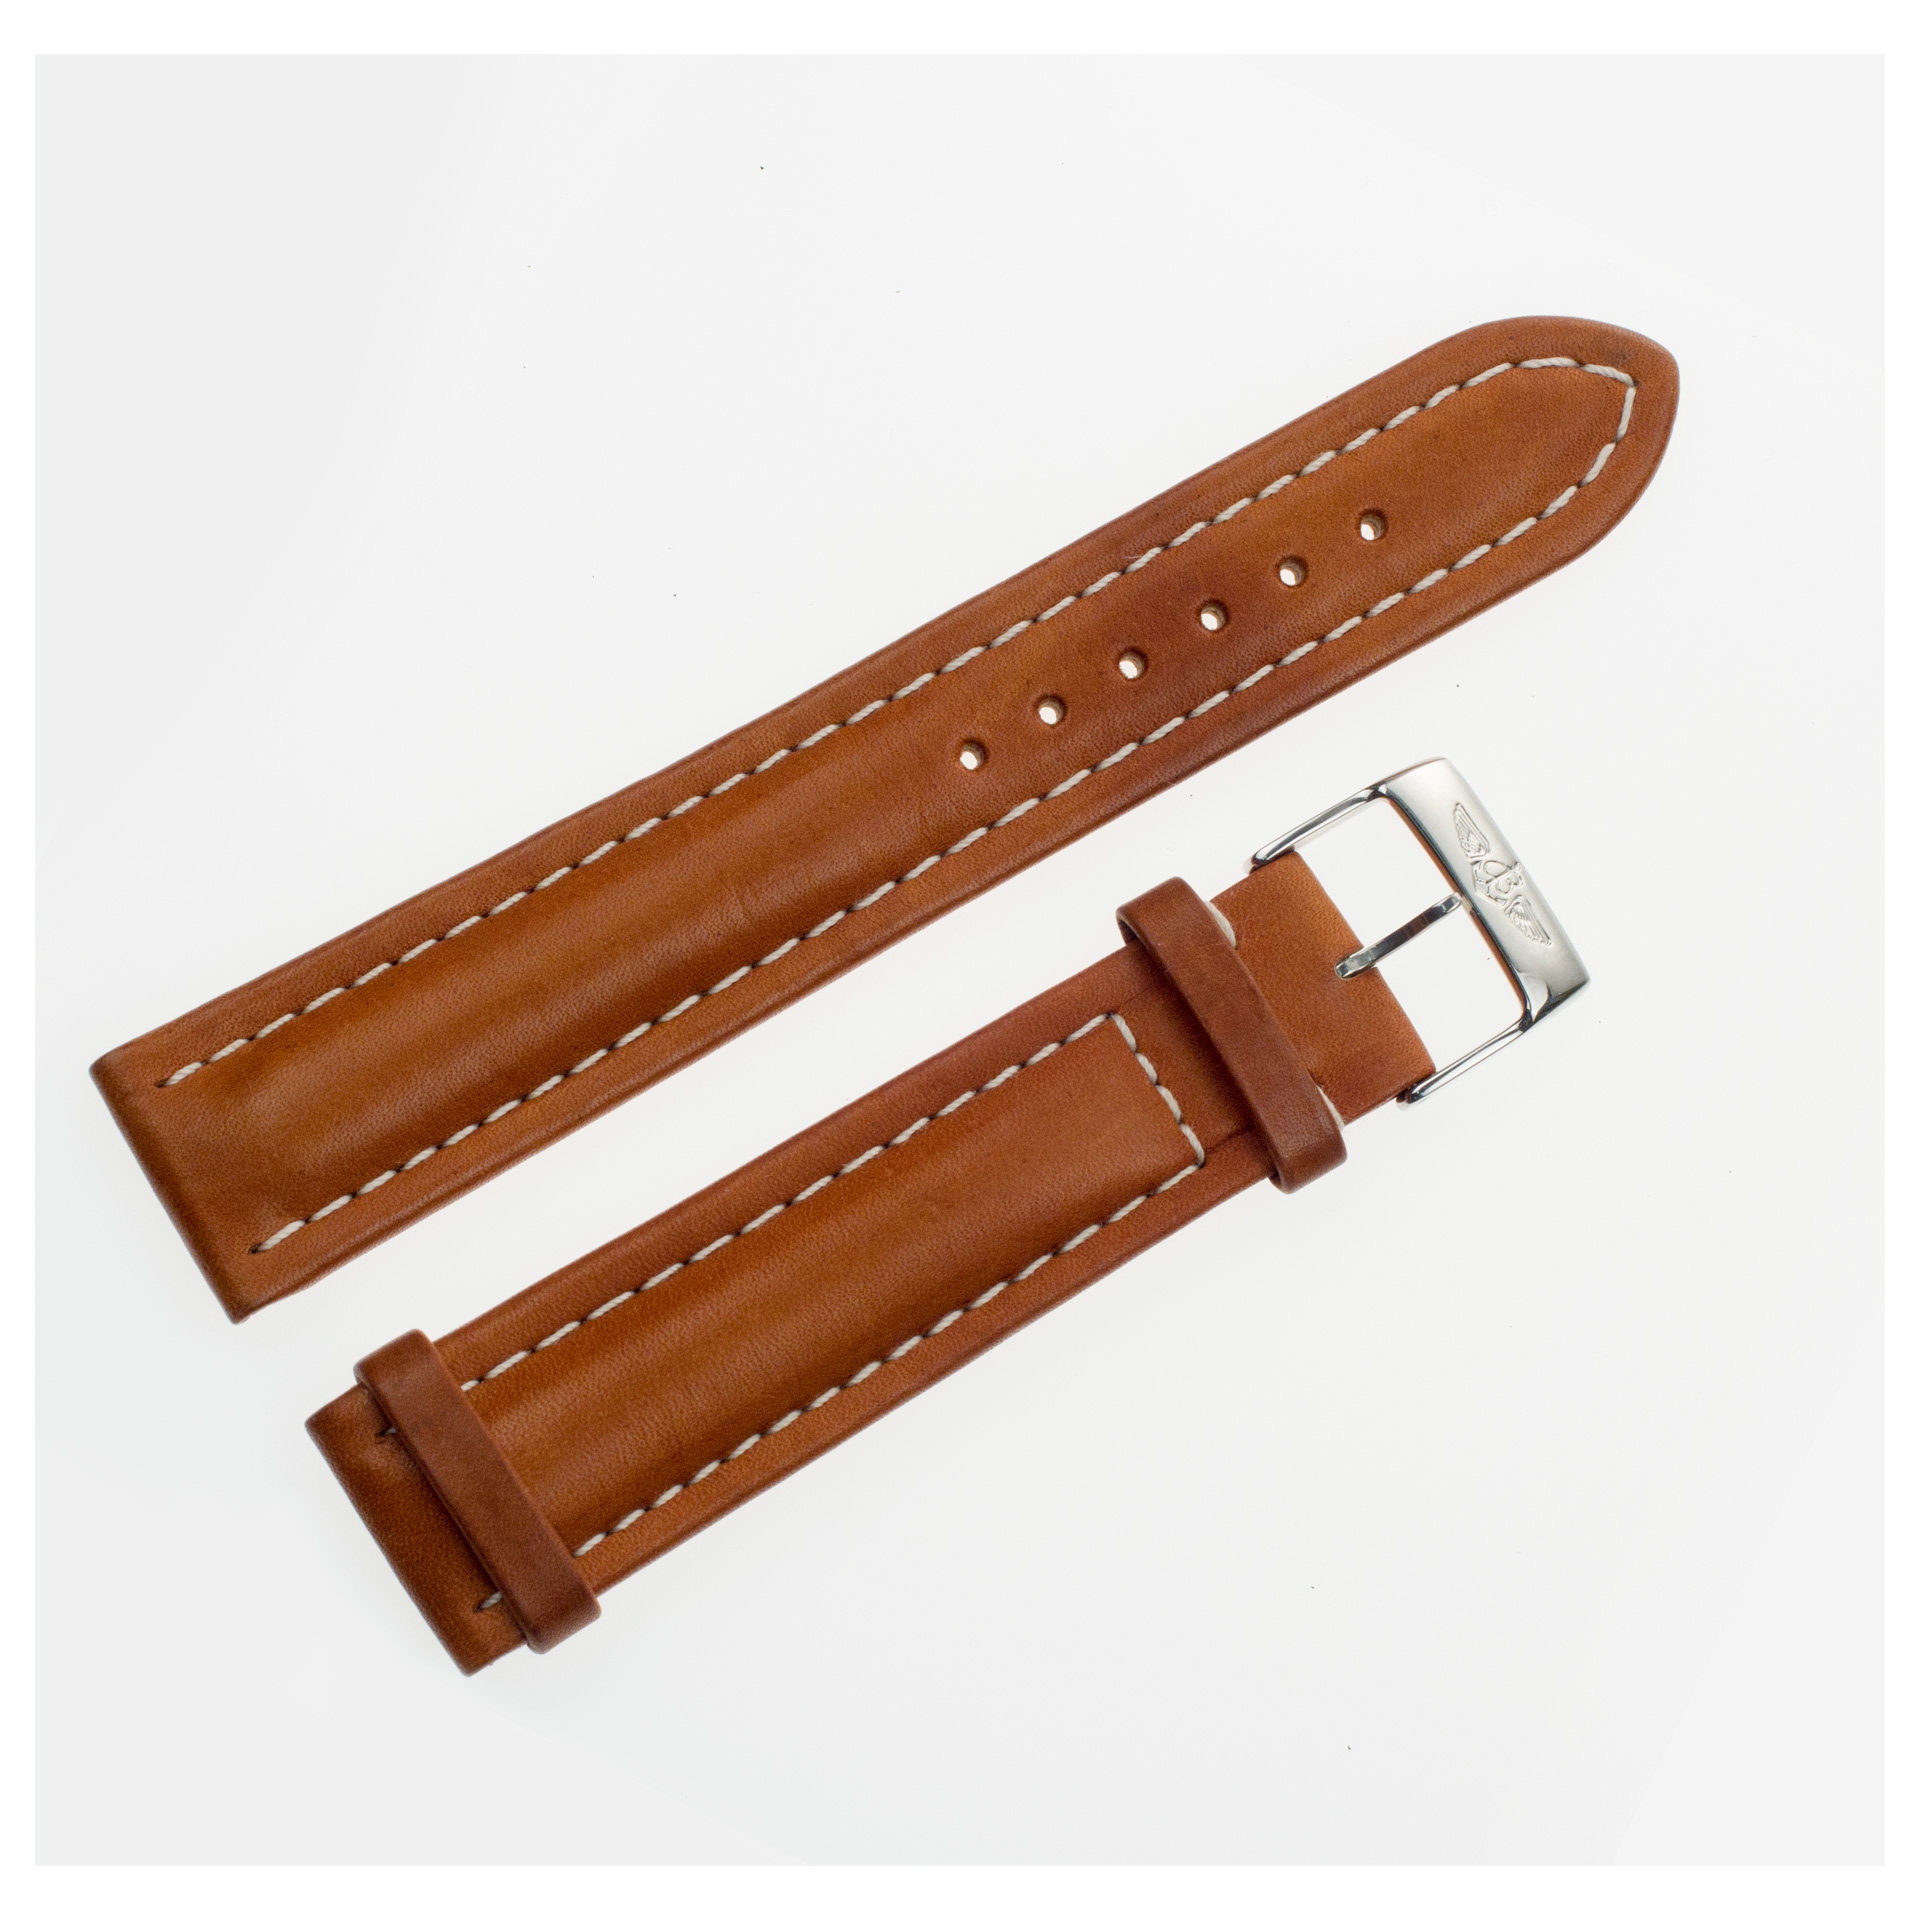 Breitling Leather Strap (20x18) With A Buckle. Length Of 4.75" Long Piece And 3" Short Piece.